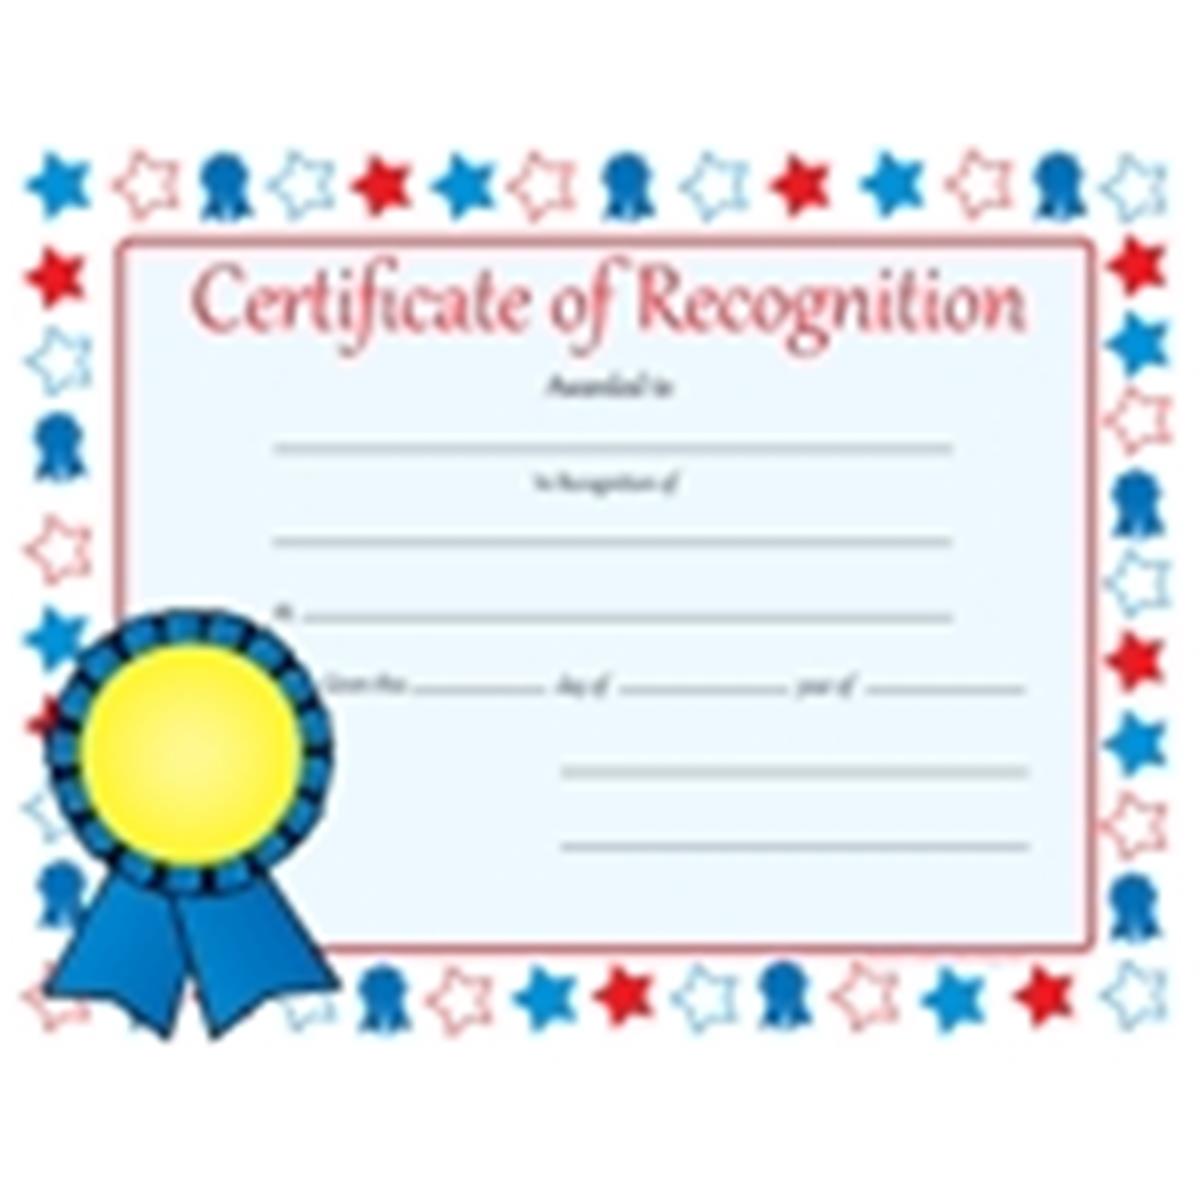 Se-3211 8.5 X 11 In. Cerificate Of Recognition - 30 Sheets Per Pack